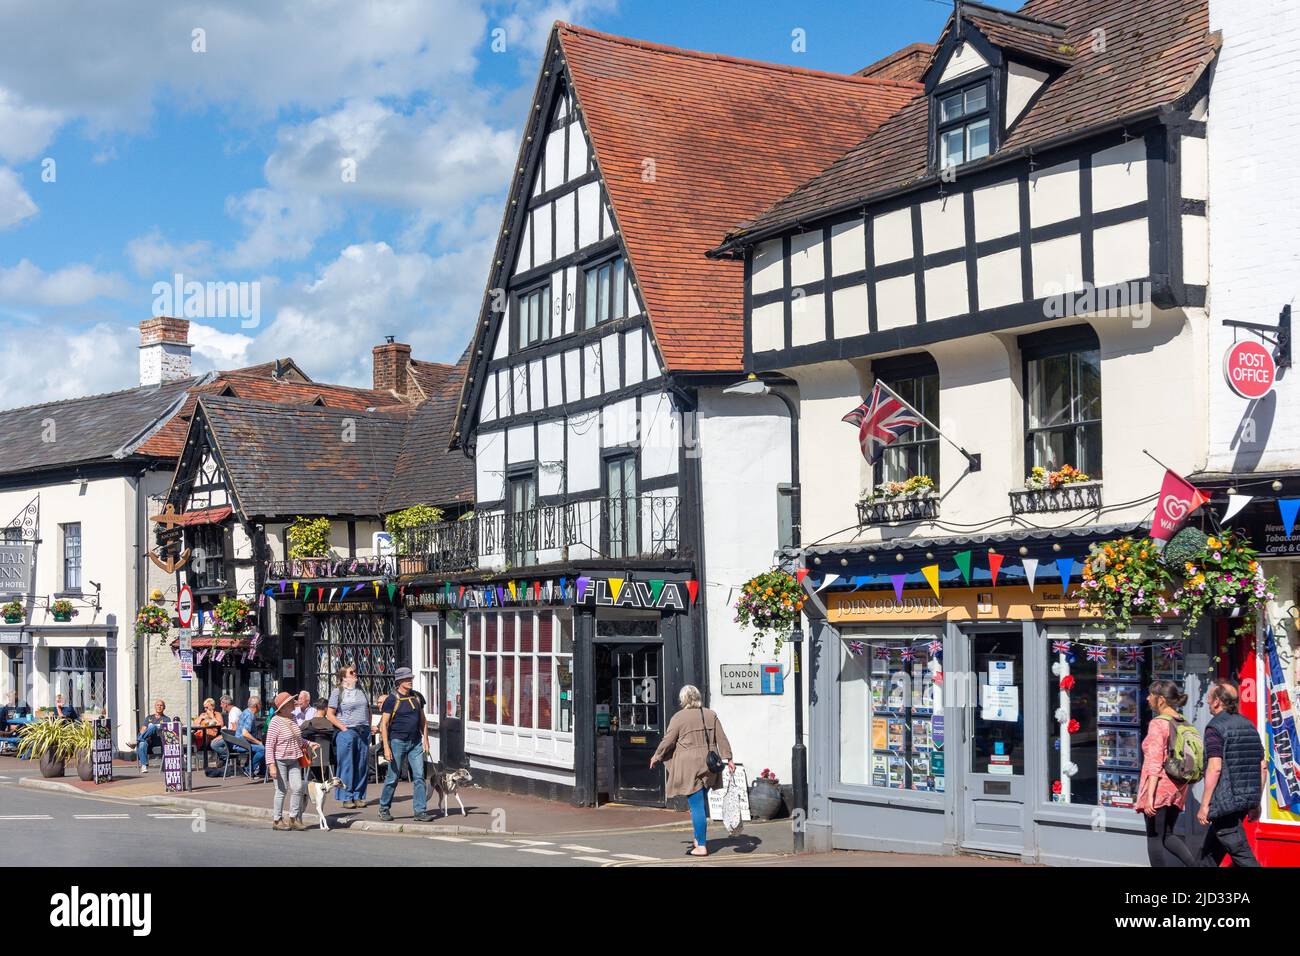 Period buildings, High Street, Upton-upon-Severn, Worcestershire, England, United Kingdom Stock Photo